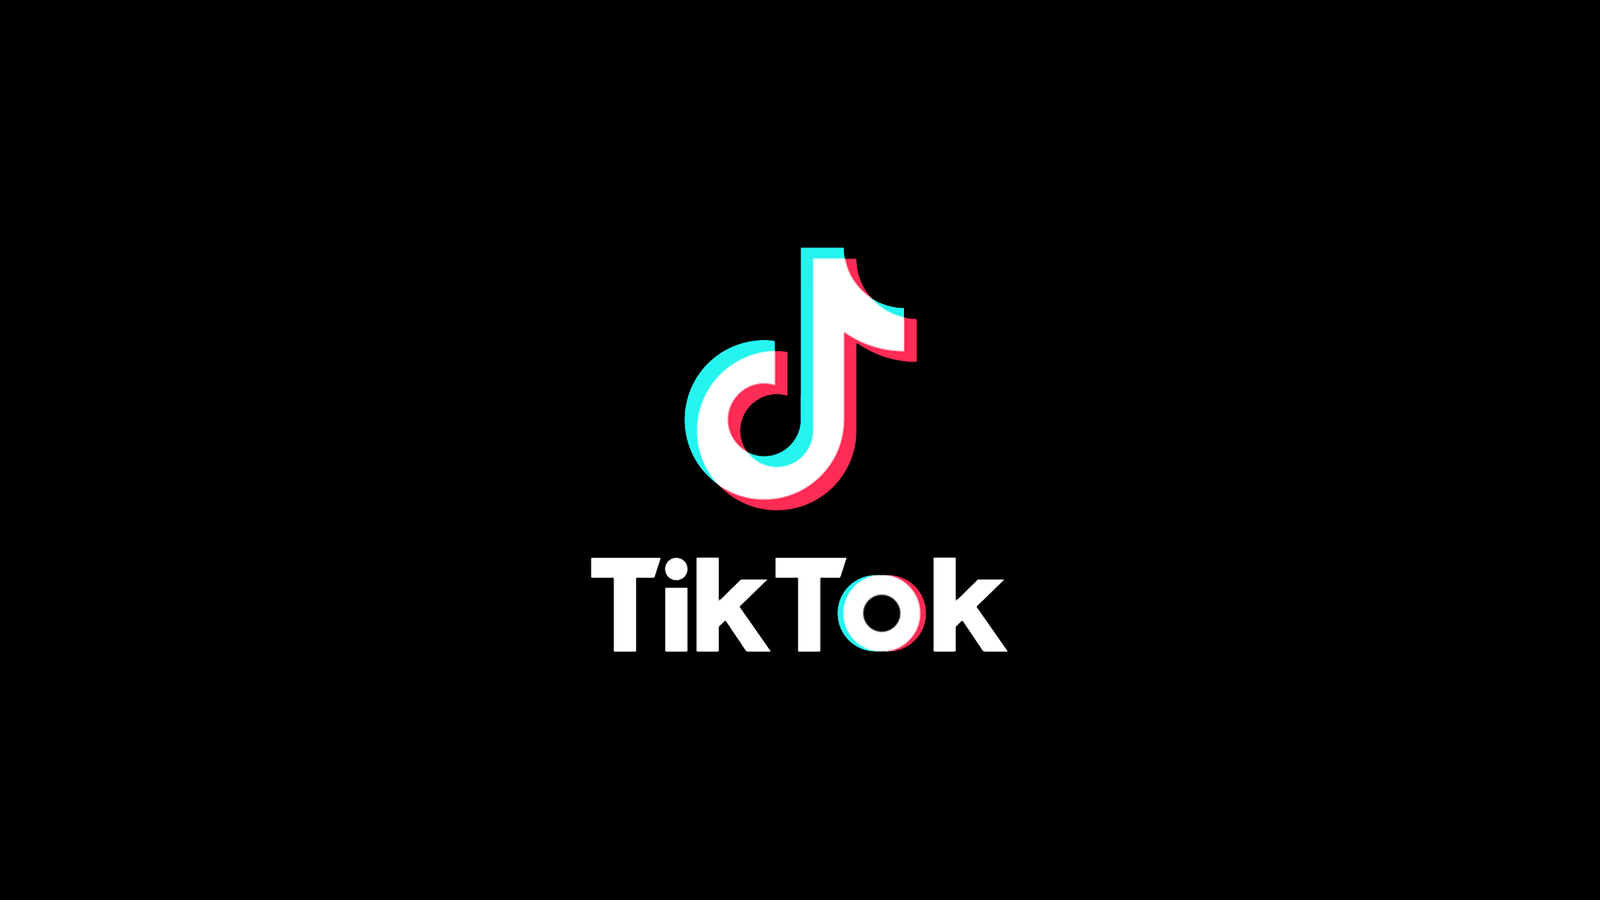 Lana Del Rey fans take over TikTok with new Lana Cult trend